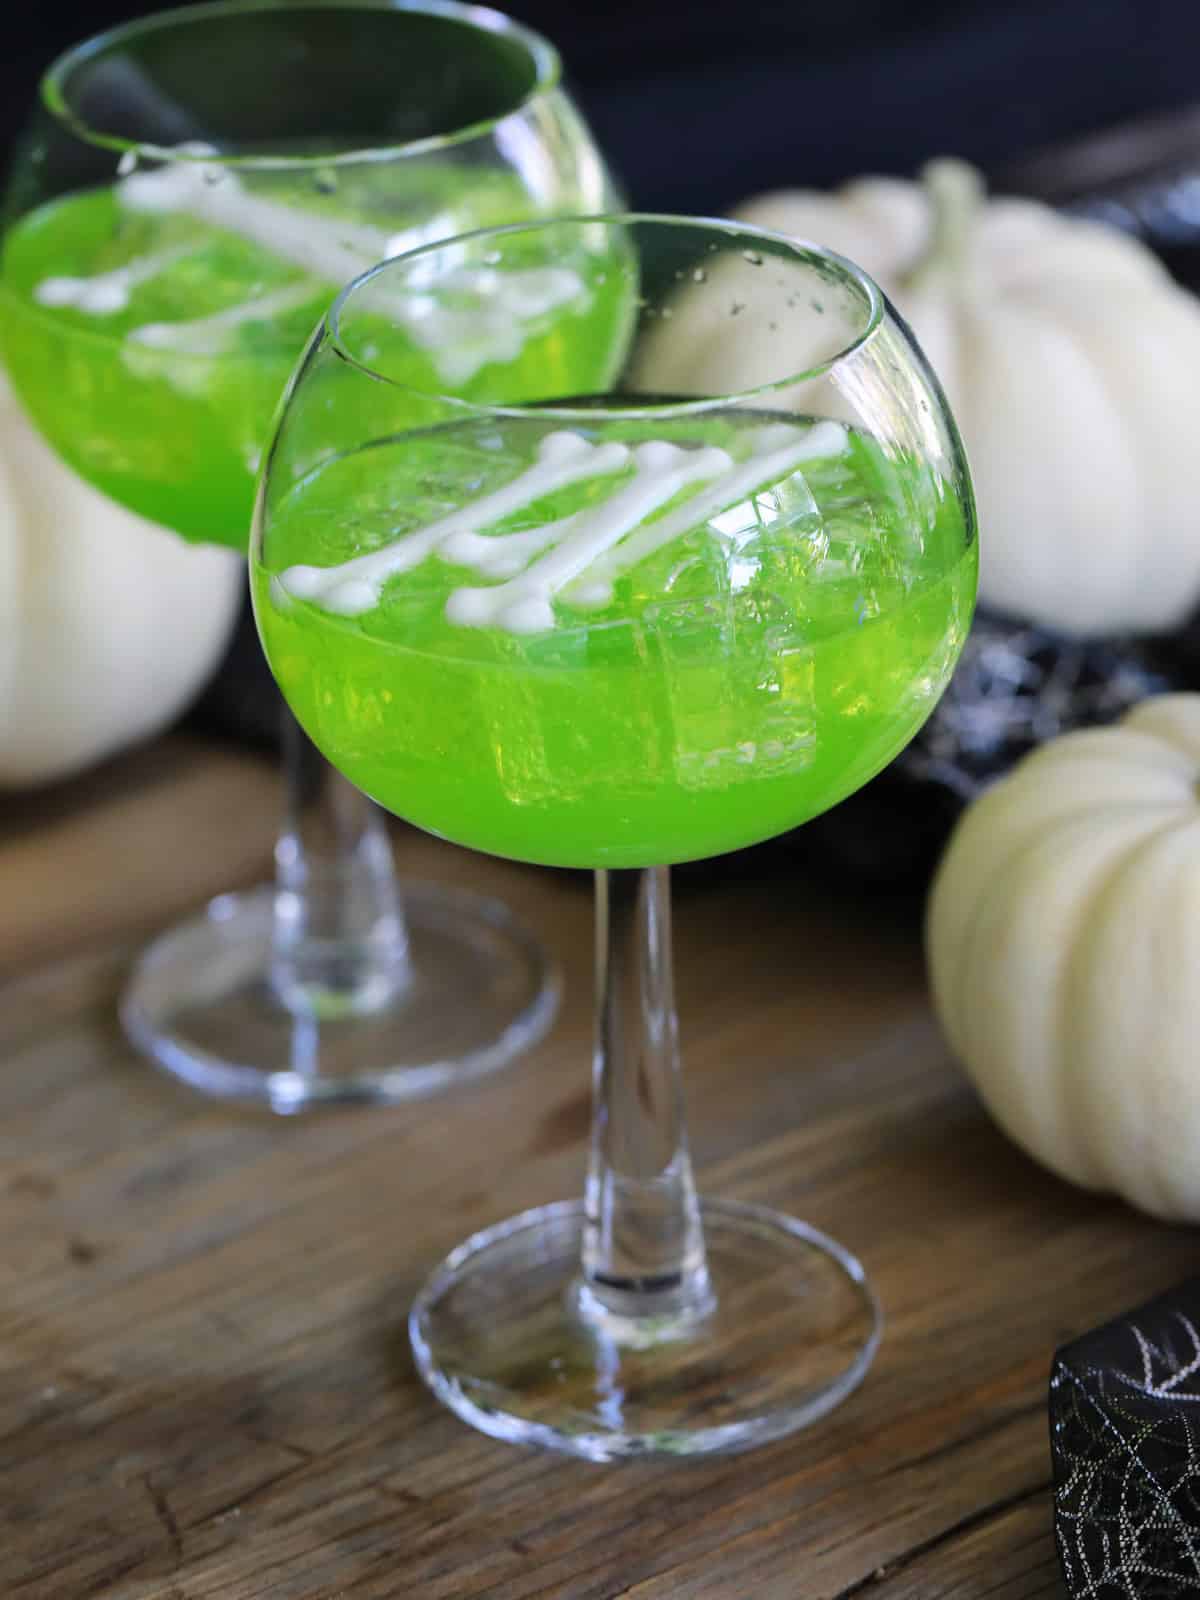 Two tall glasses filled with green drinks for a Halloween party and white bones as a garnish.